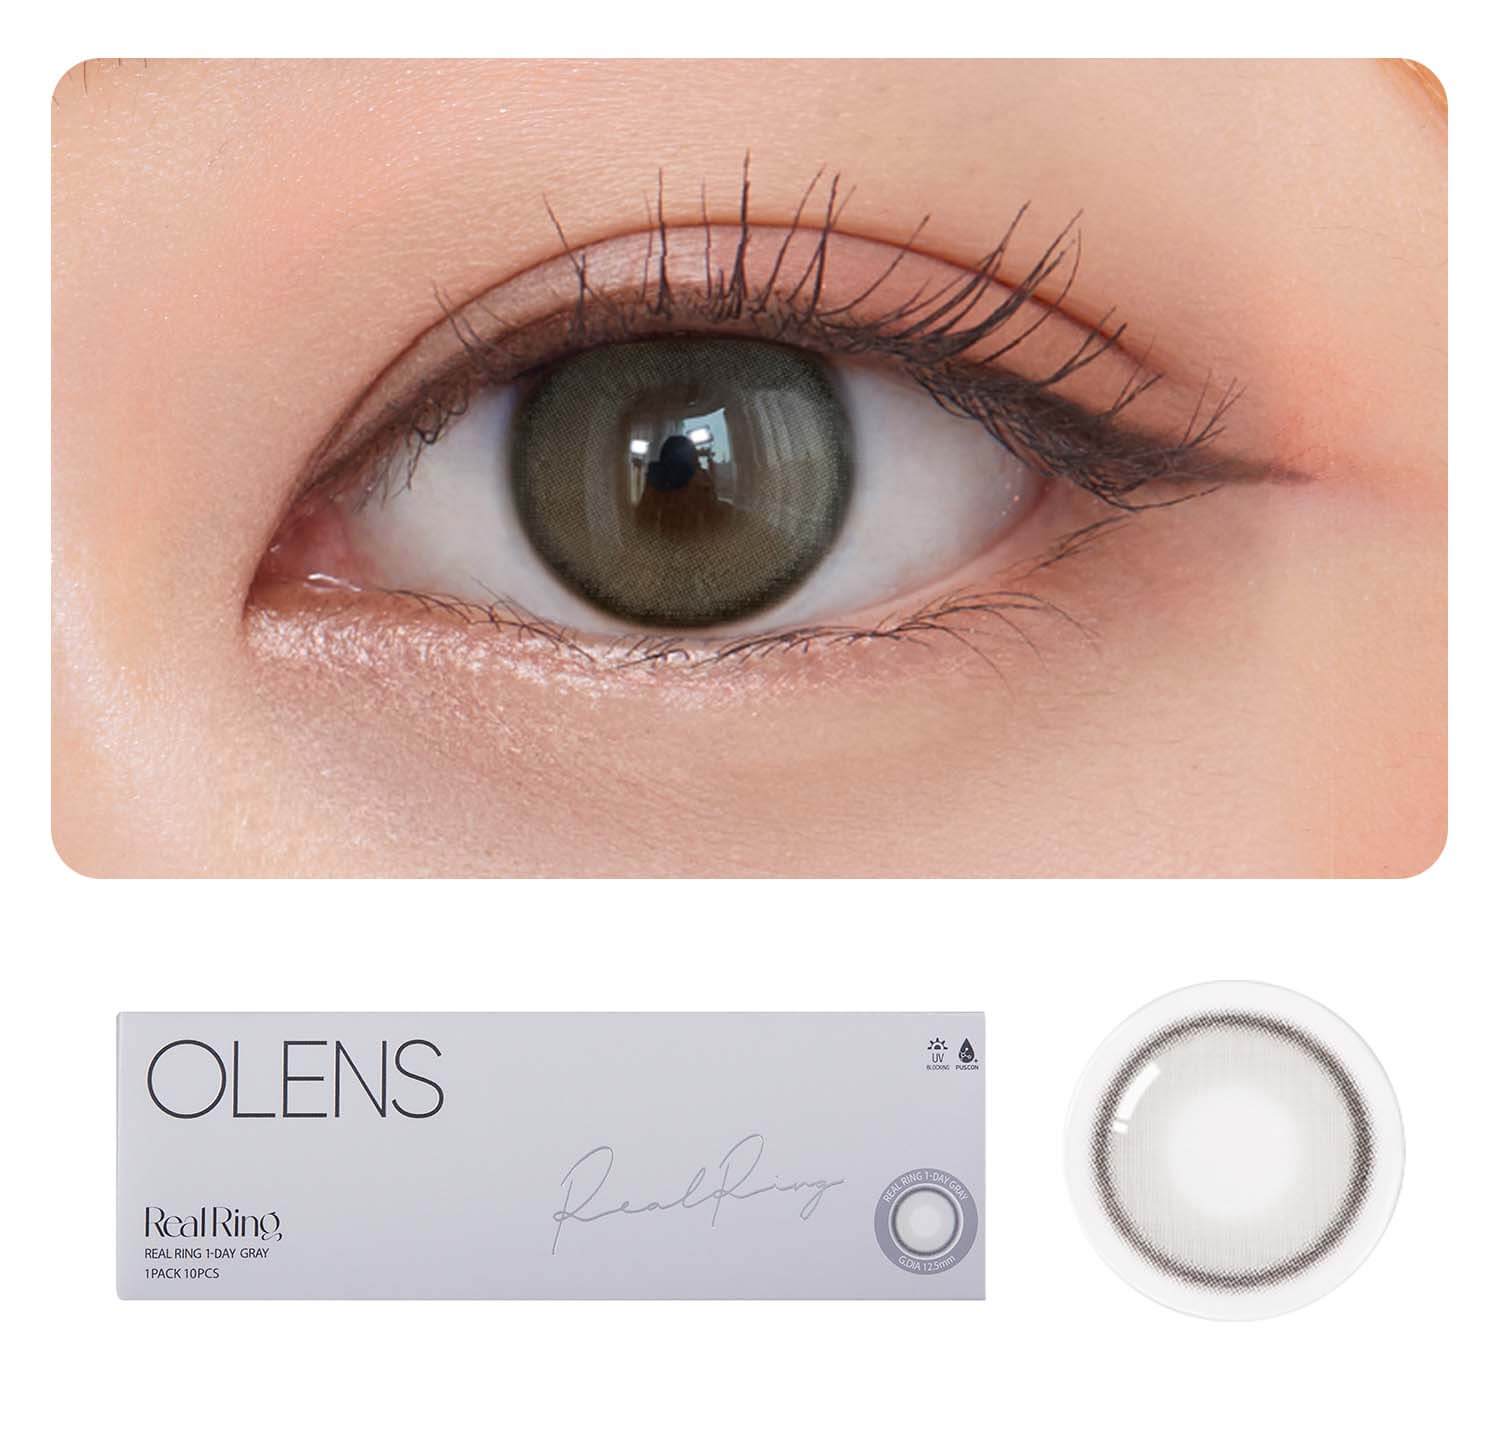 OLENS Premium Color Contact Lens | Real Ring natural, soft & comfortable colored contact lens | o-lens.co.in